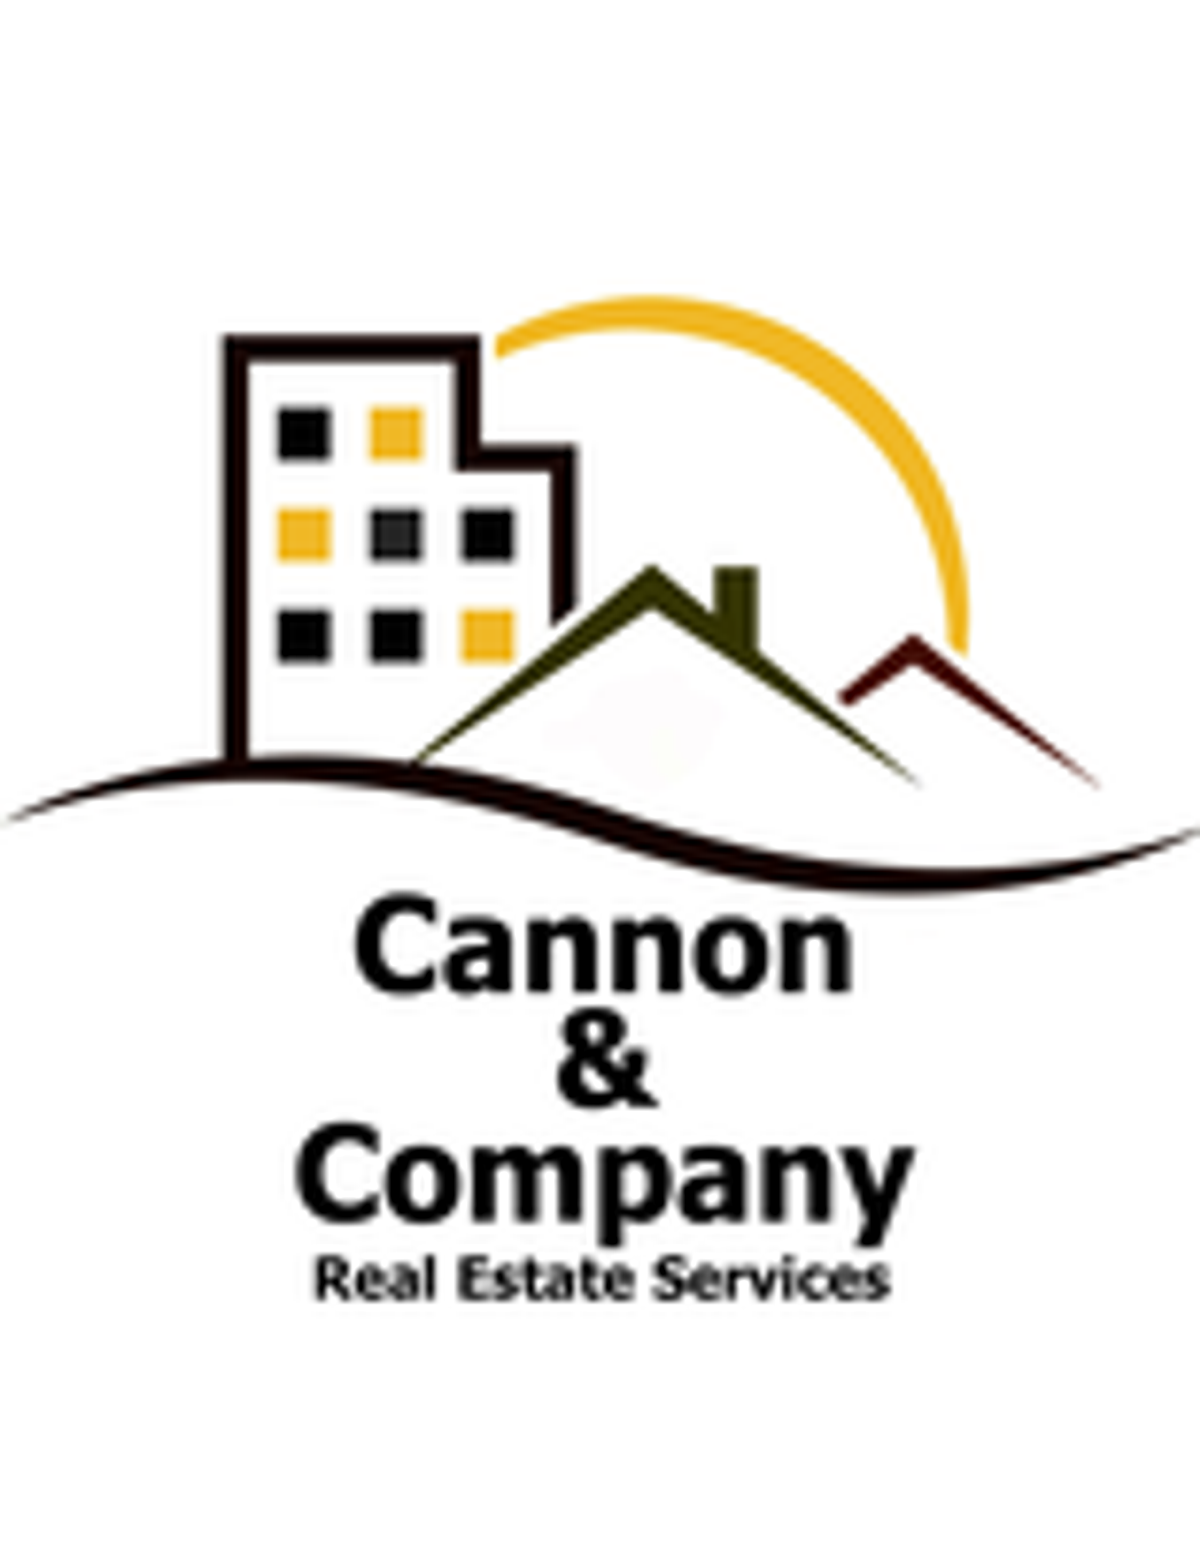 Photo for Kyle Keele, Listing Agent at Cannon & Company